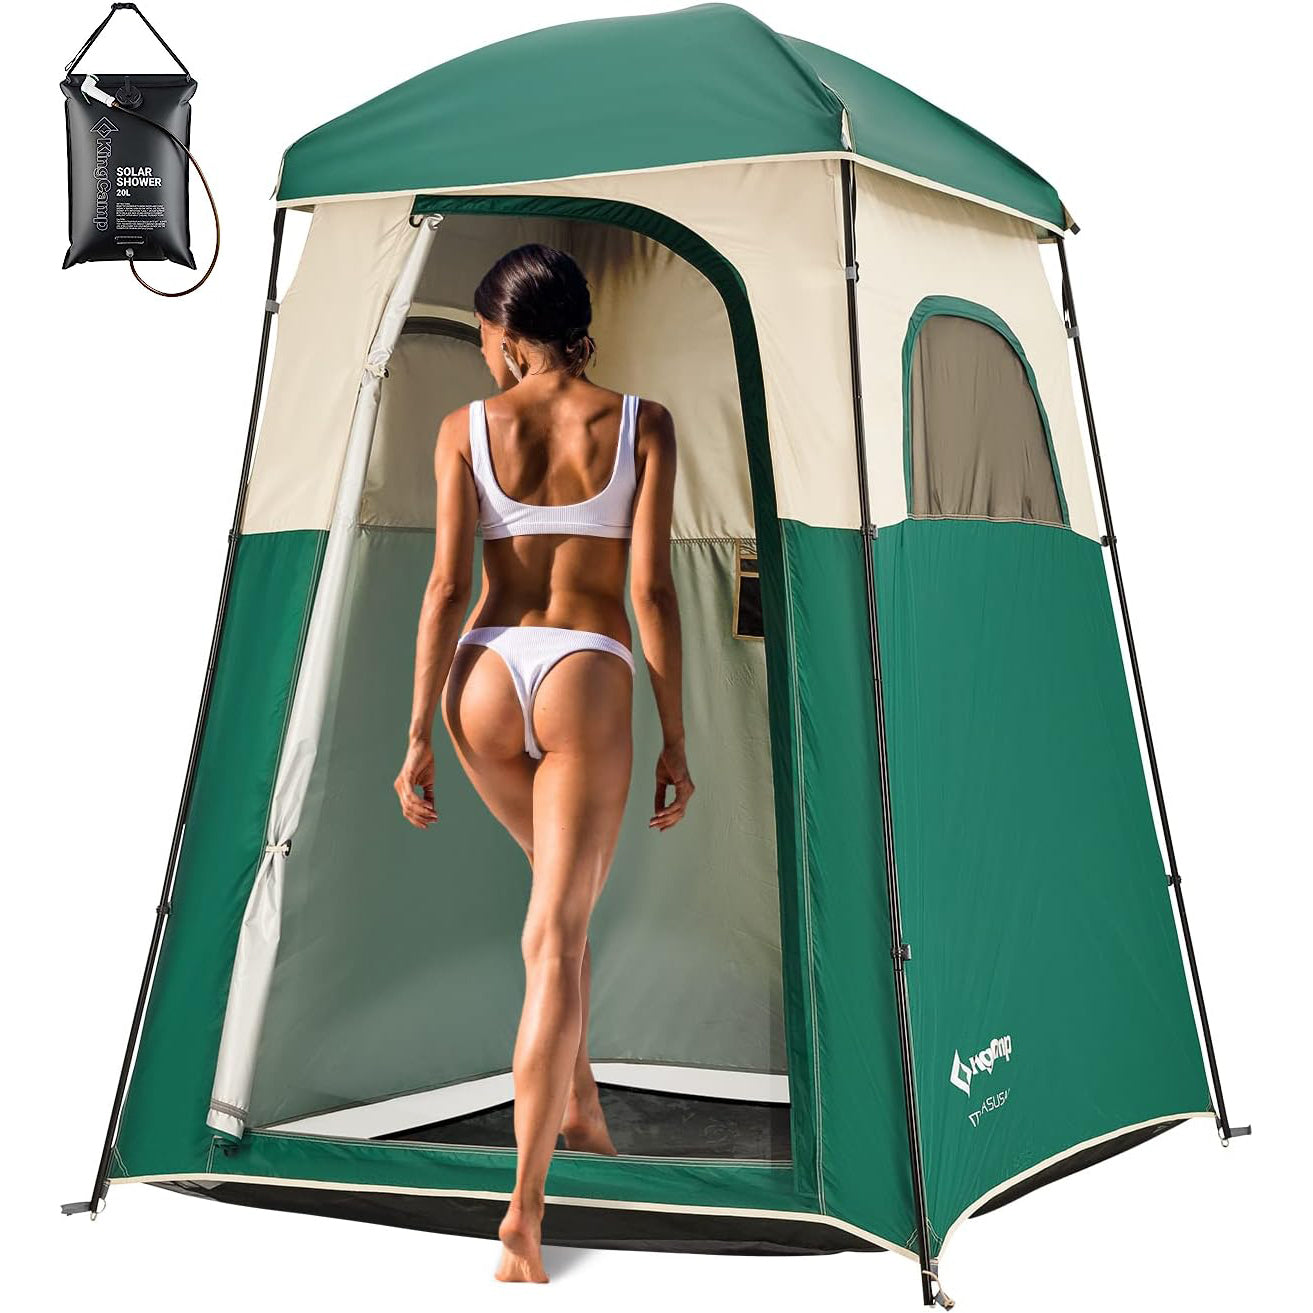 KingCamp Shower tent